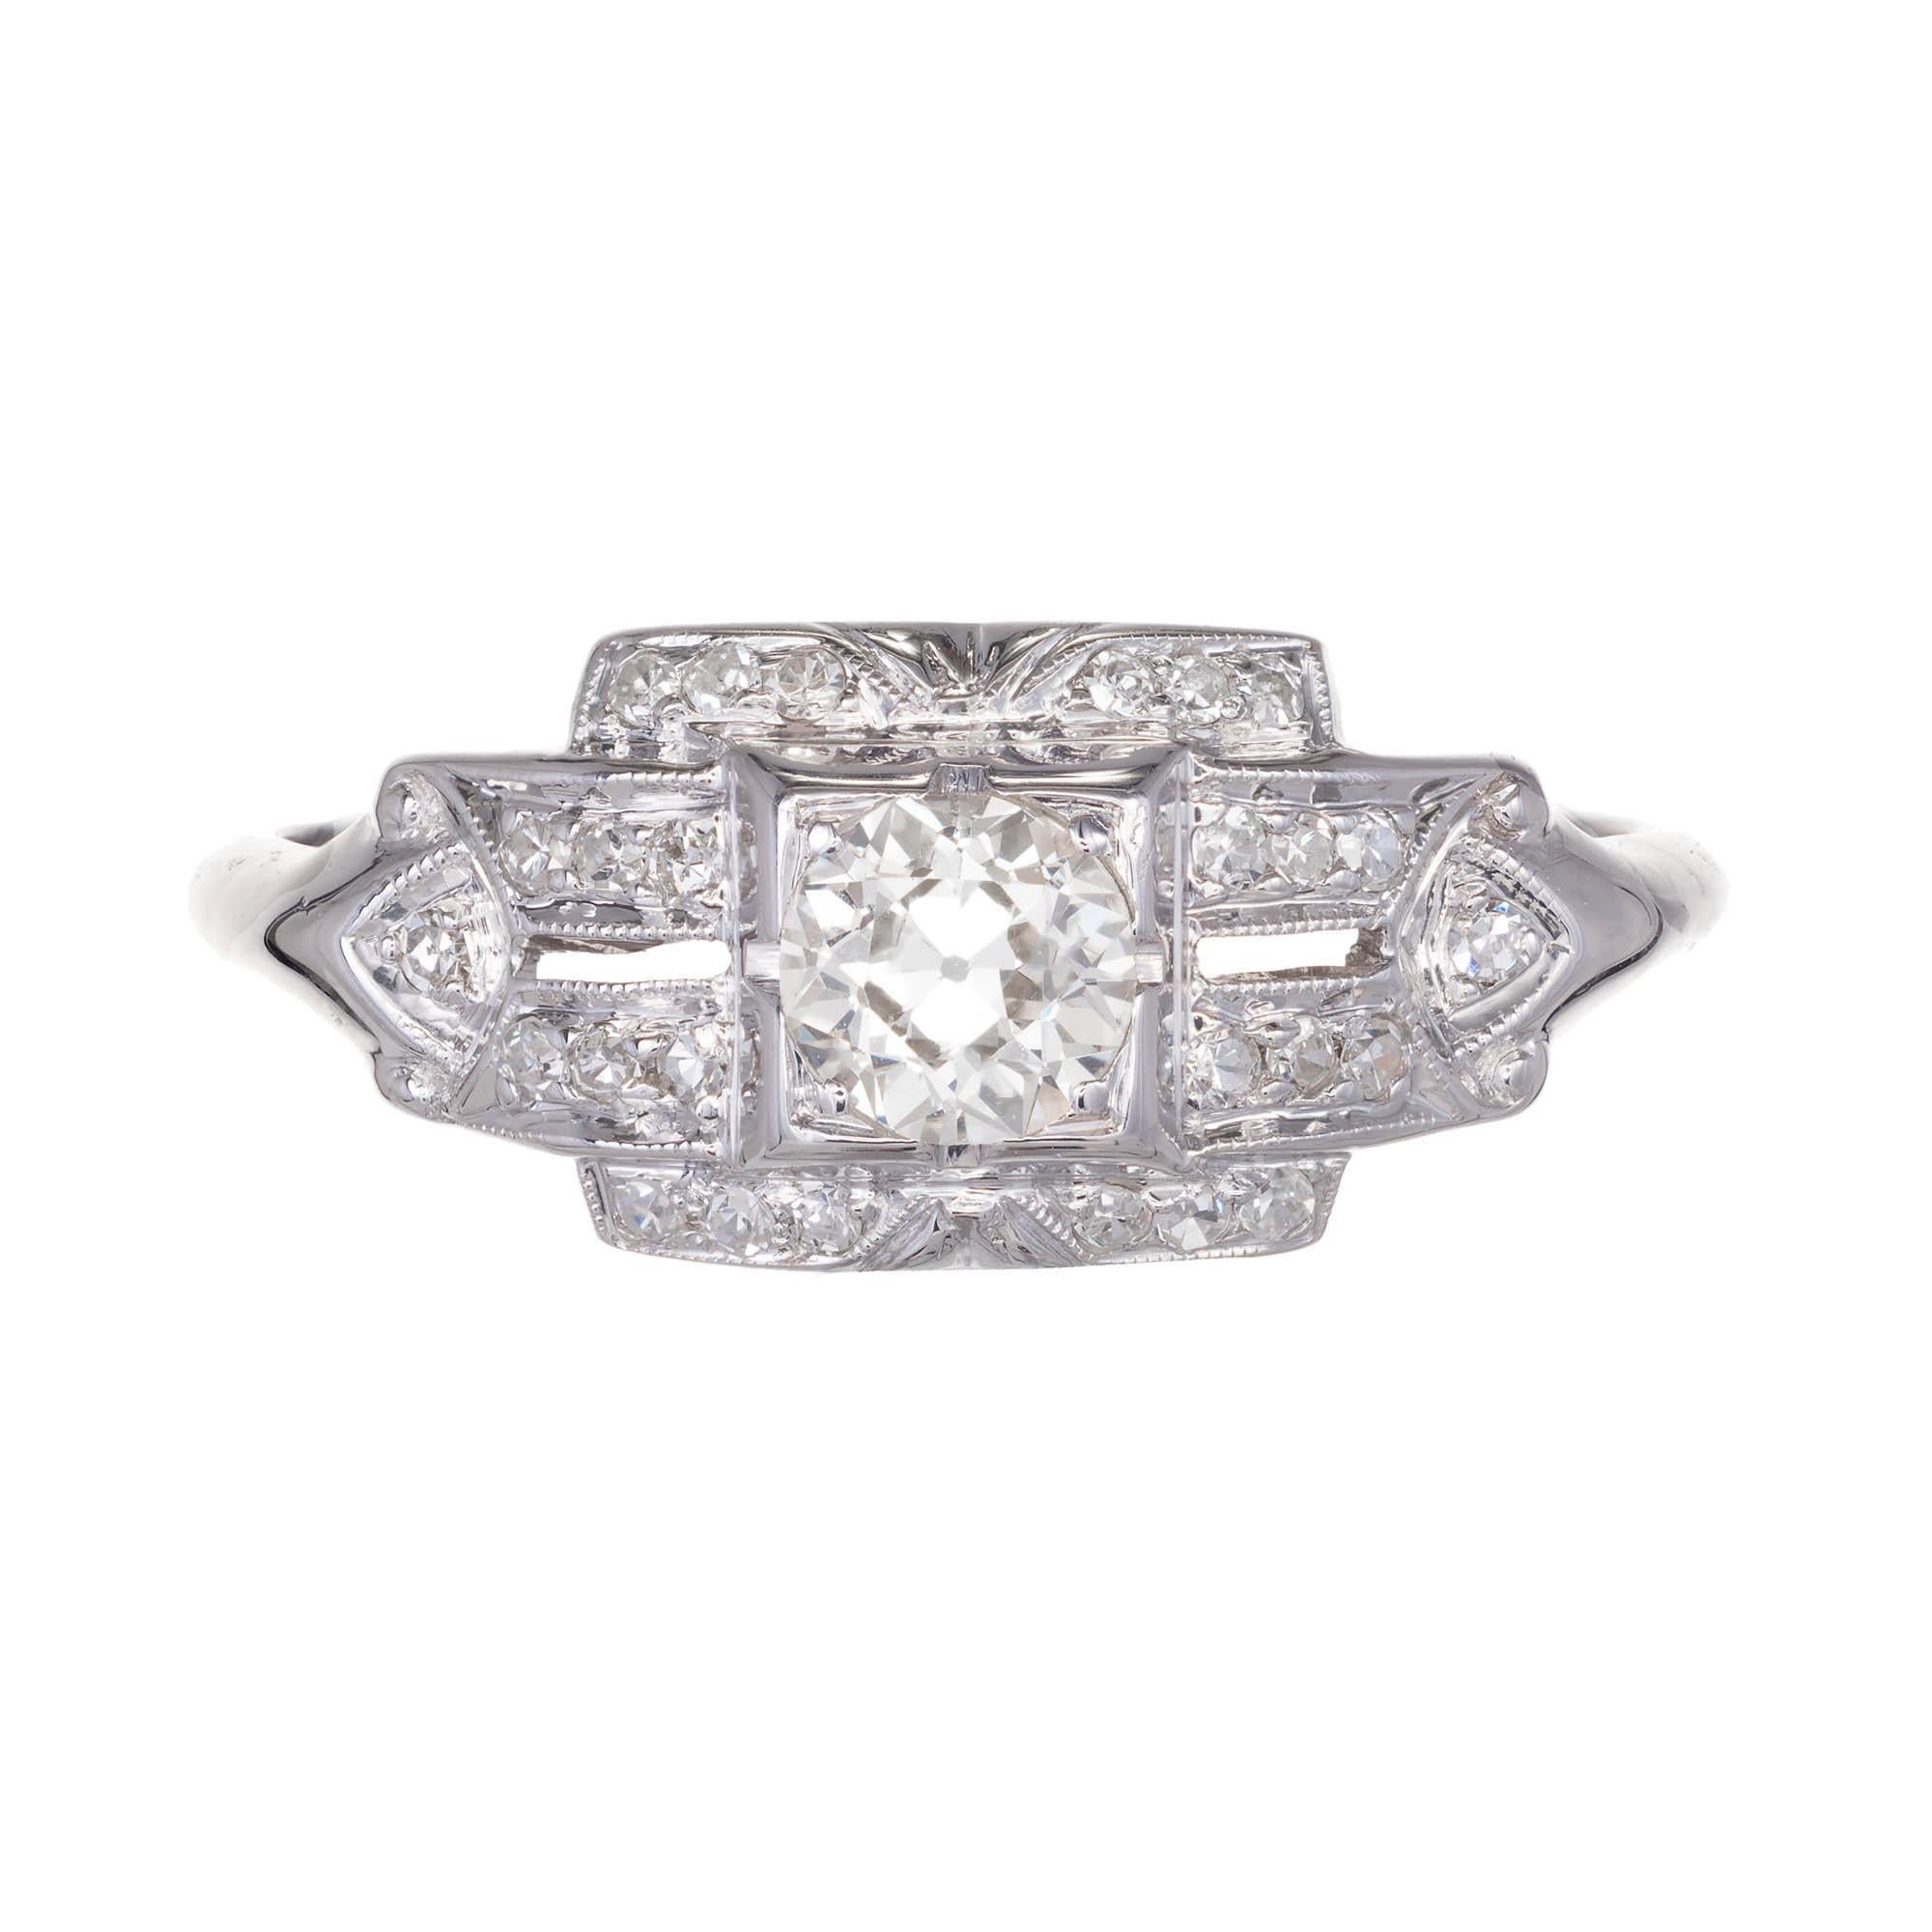 Art Deco diamond engagement ring. Center round diamond set in square setting with geometric designs set with round diamonds to the sides and top and bottom.

1 round Old European Q-R VS2 diamond approximate .30 carat. EGL Certificate: